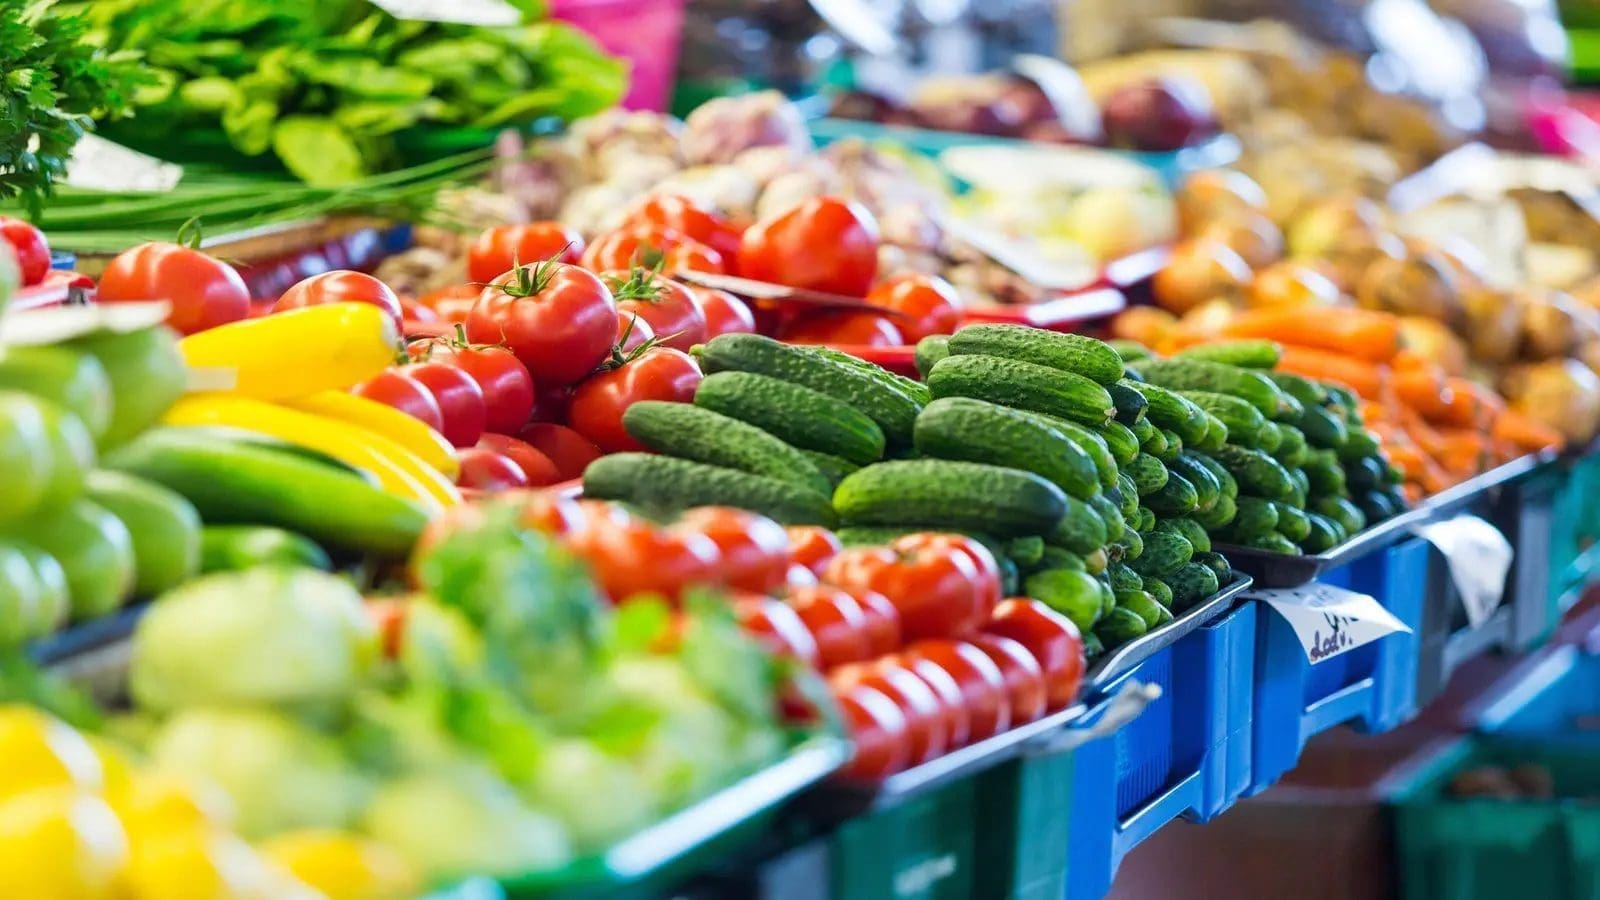 Competition Commission South Africa publishes Fresh Produce Market Inquiry Terms of Reference